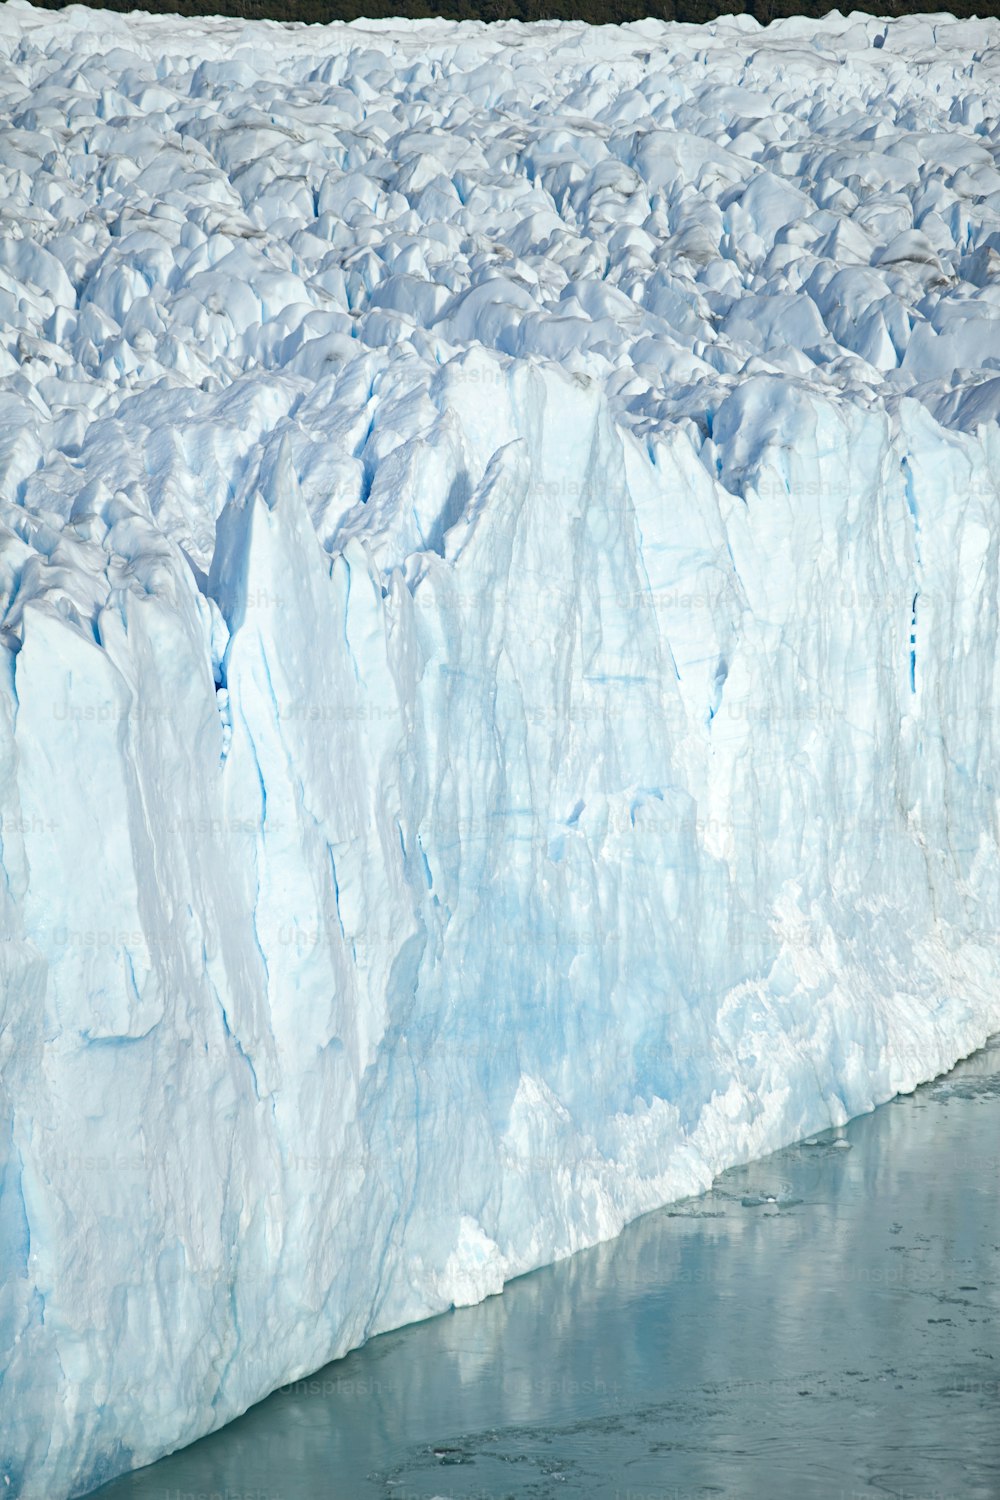 a large iceberg with a man standing on top of it